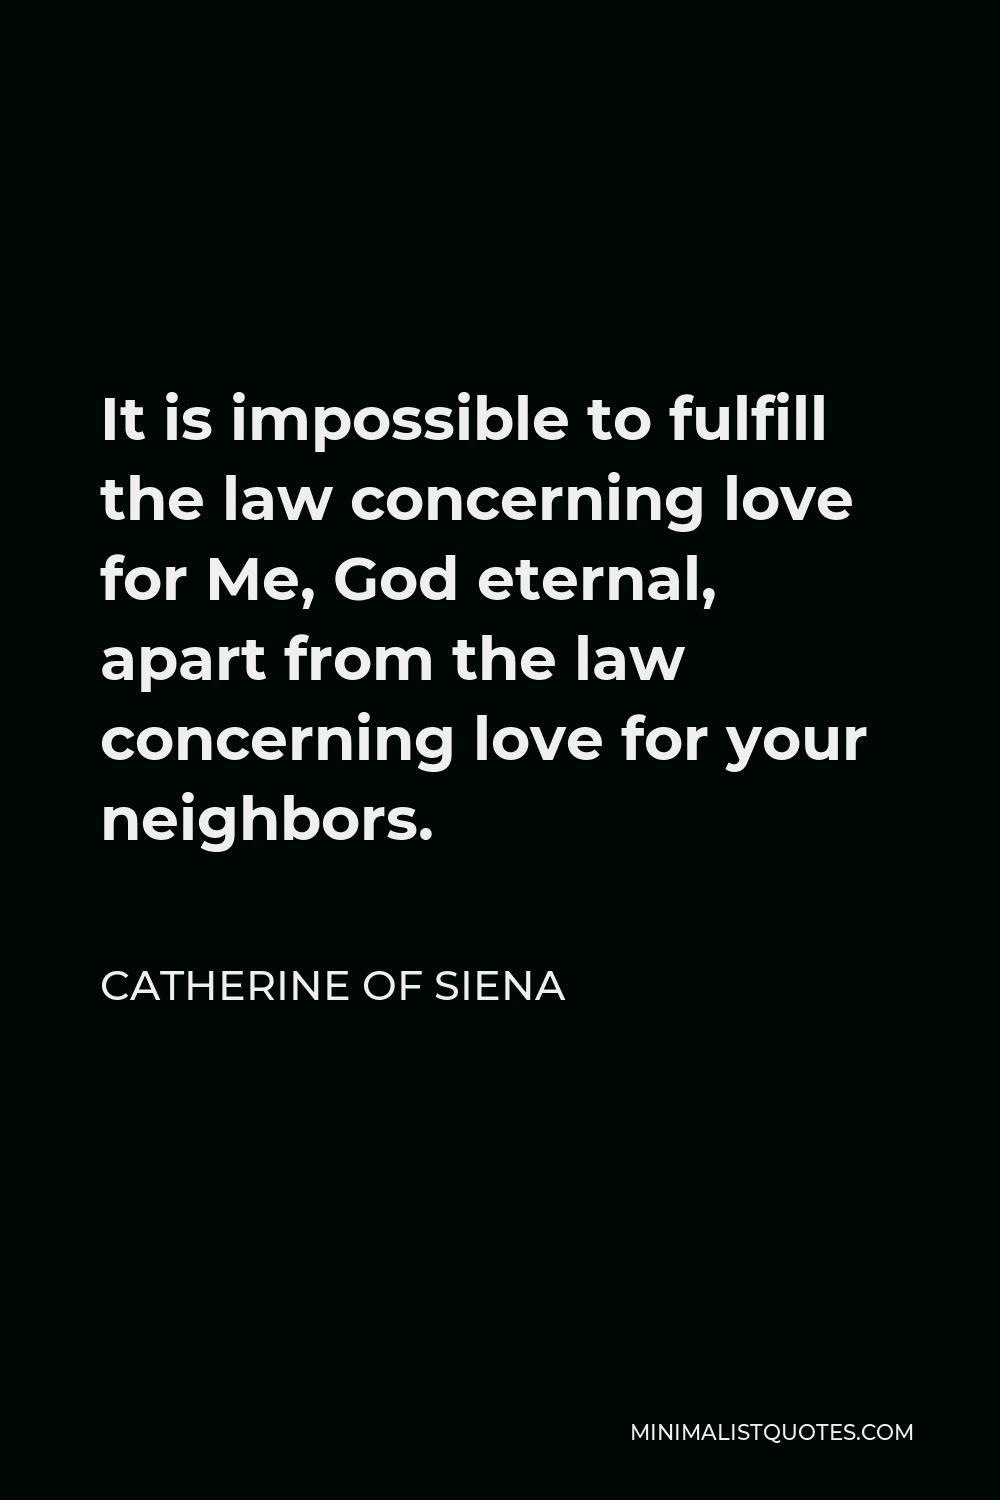 Catherine of Siena Quote - It is impossible to fulfill the law concerning love for Me, God eternal, apart from the law concerning love for your neighbors.